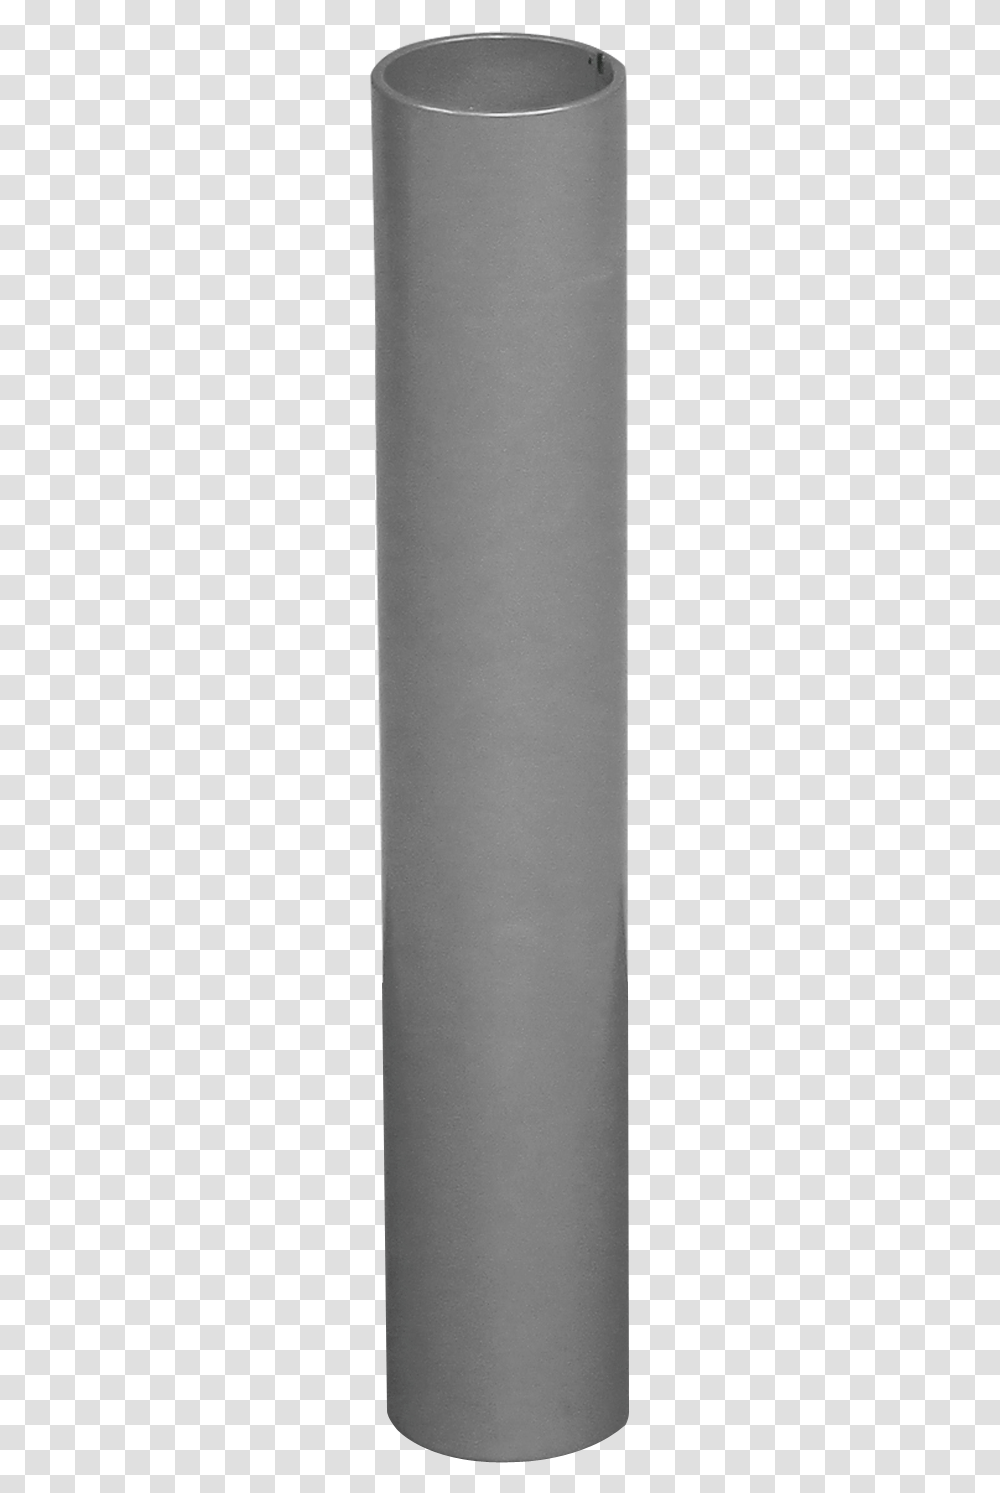 Steel Casing Pipe, Appliance, White Board, Screen, Electronics Transparent Png